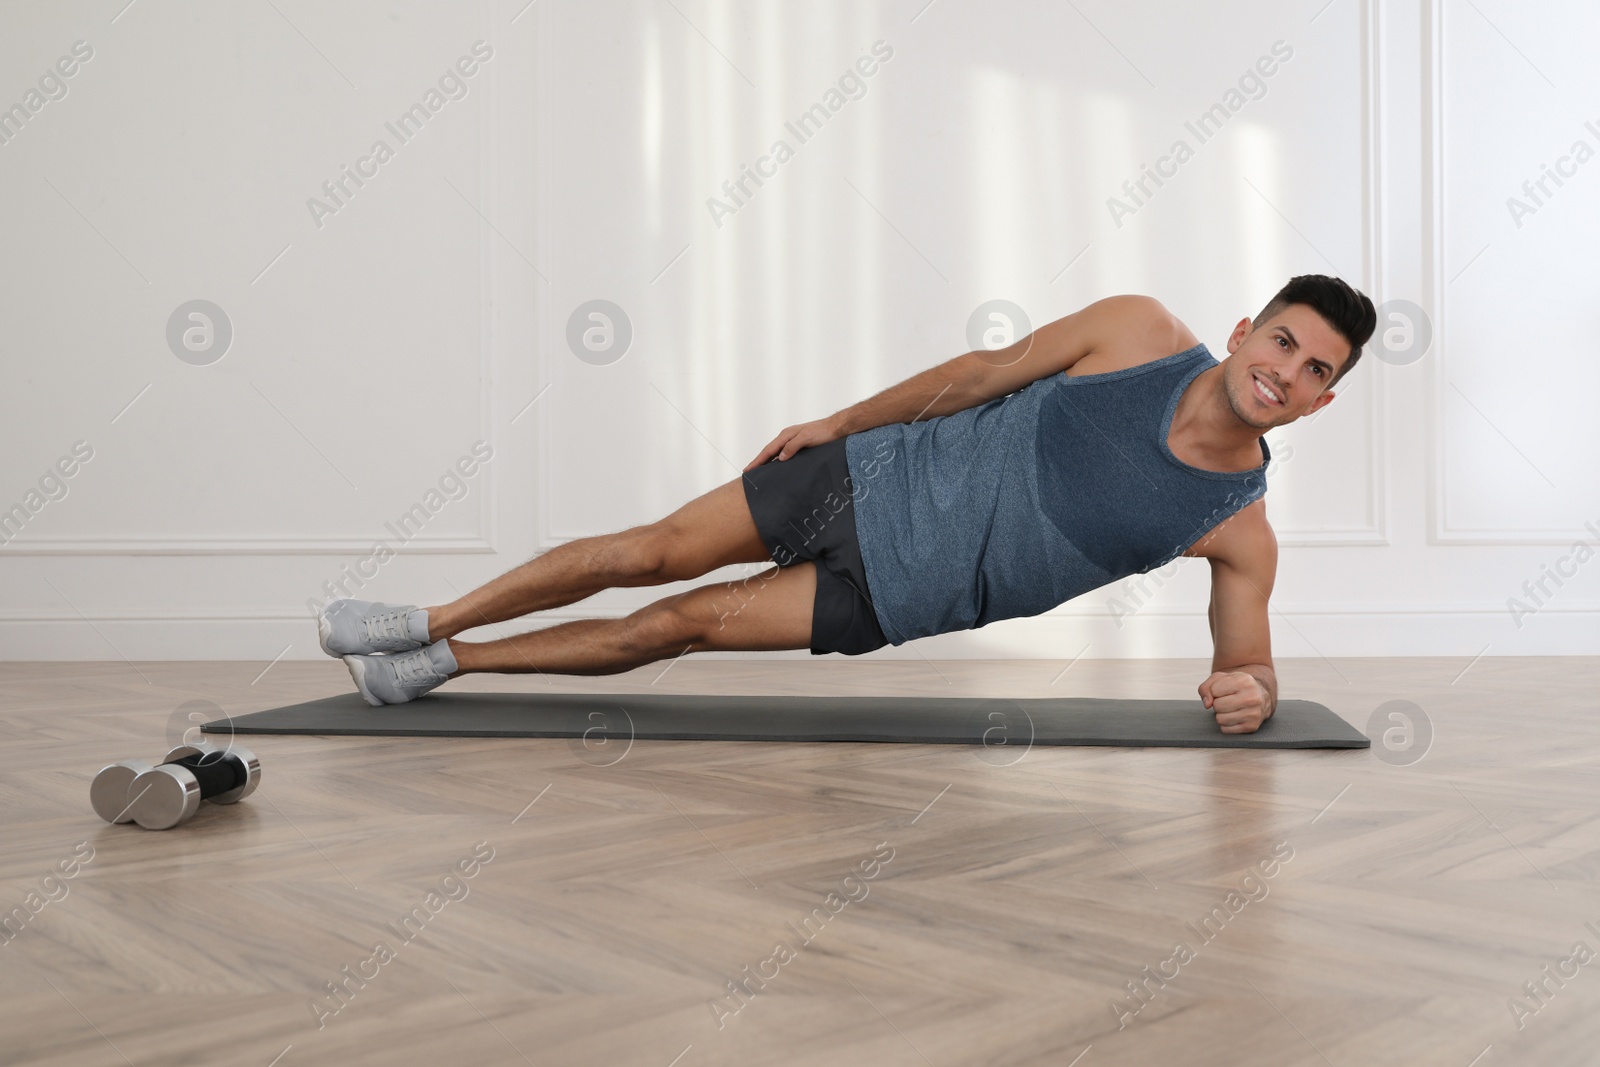 Photo of Handsome man doing side plank exercise on yoga mat indoors